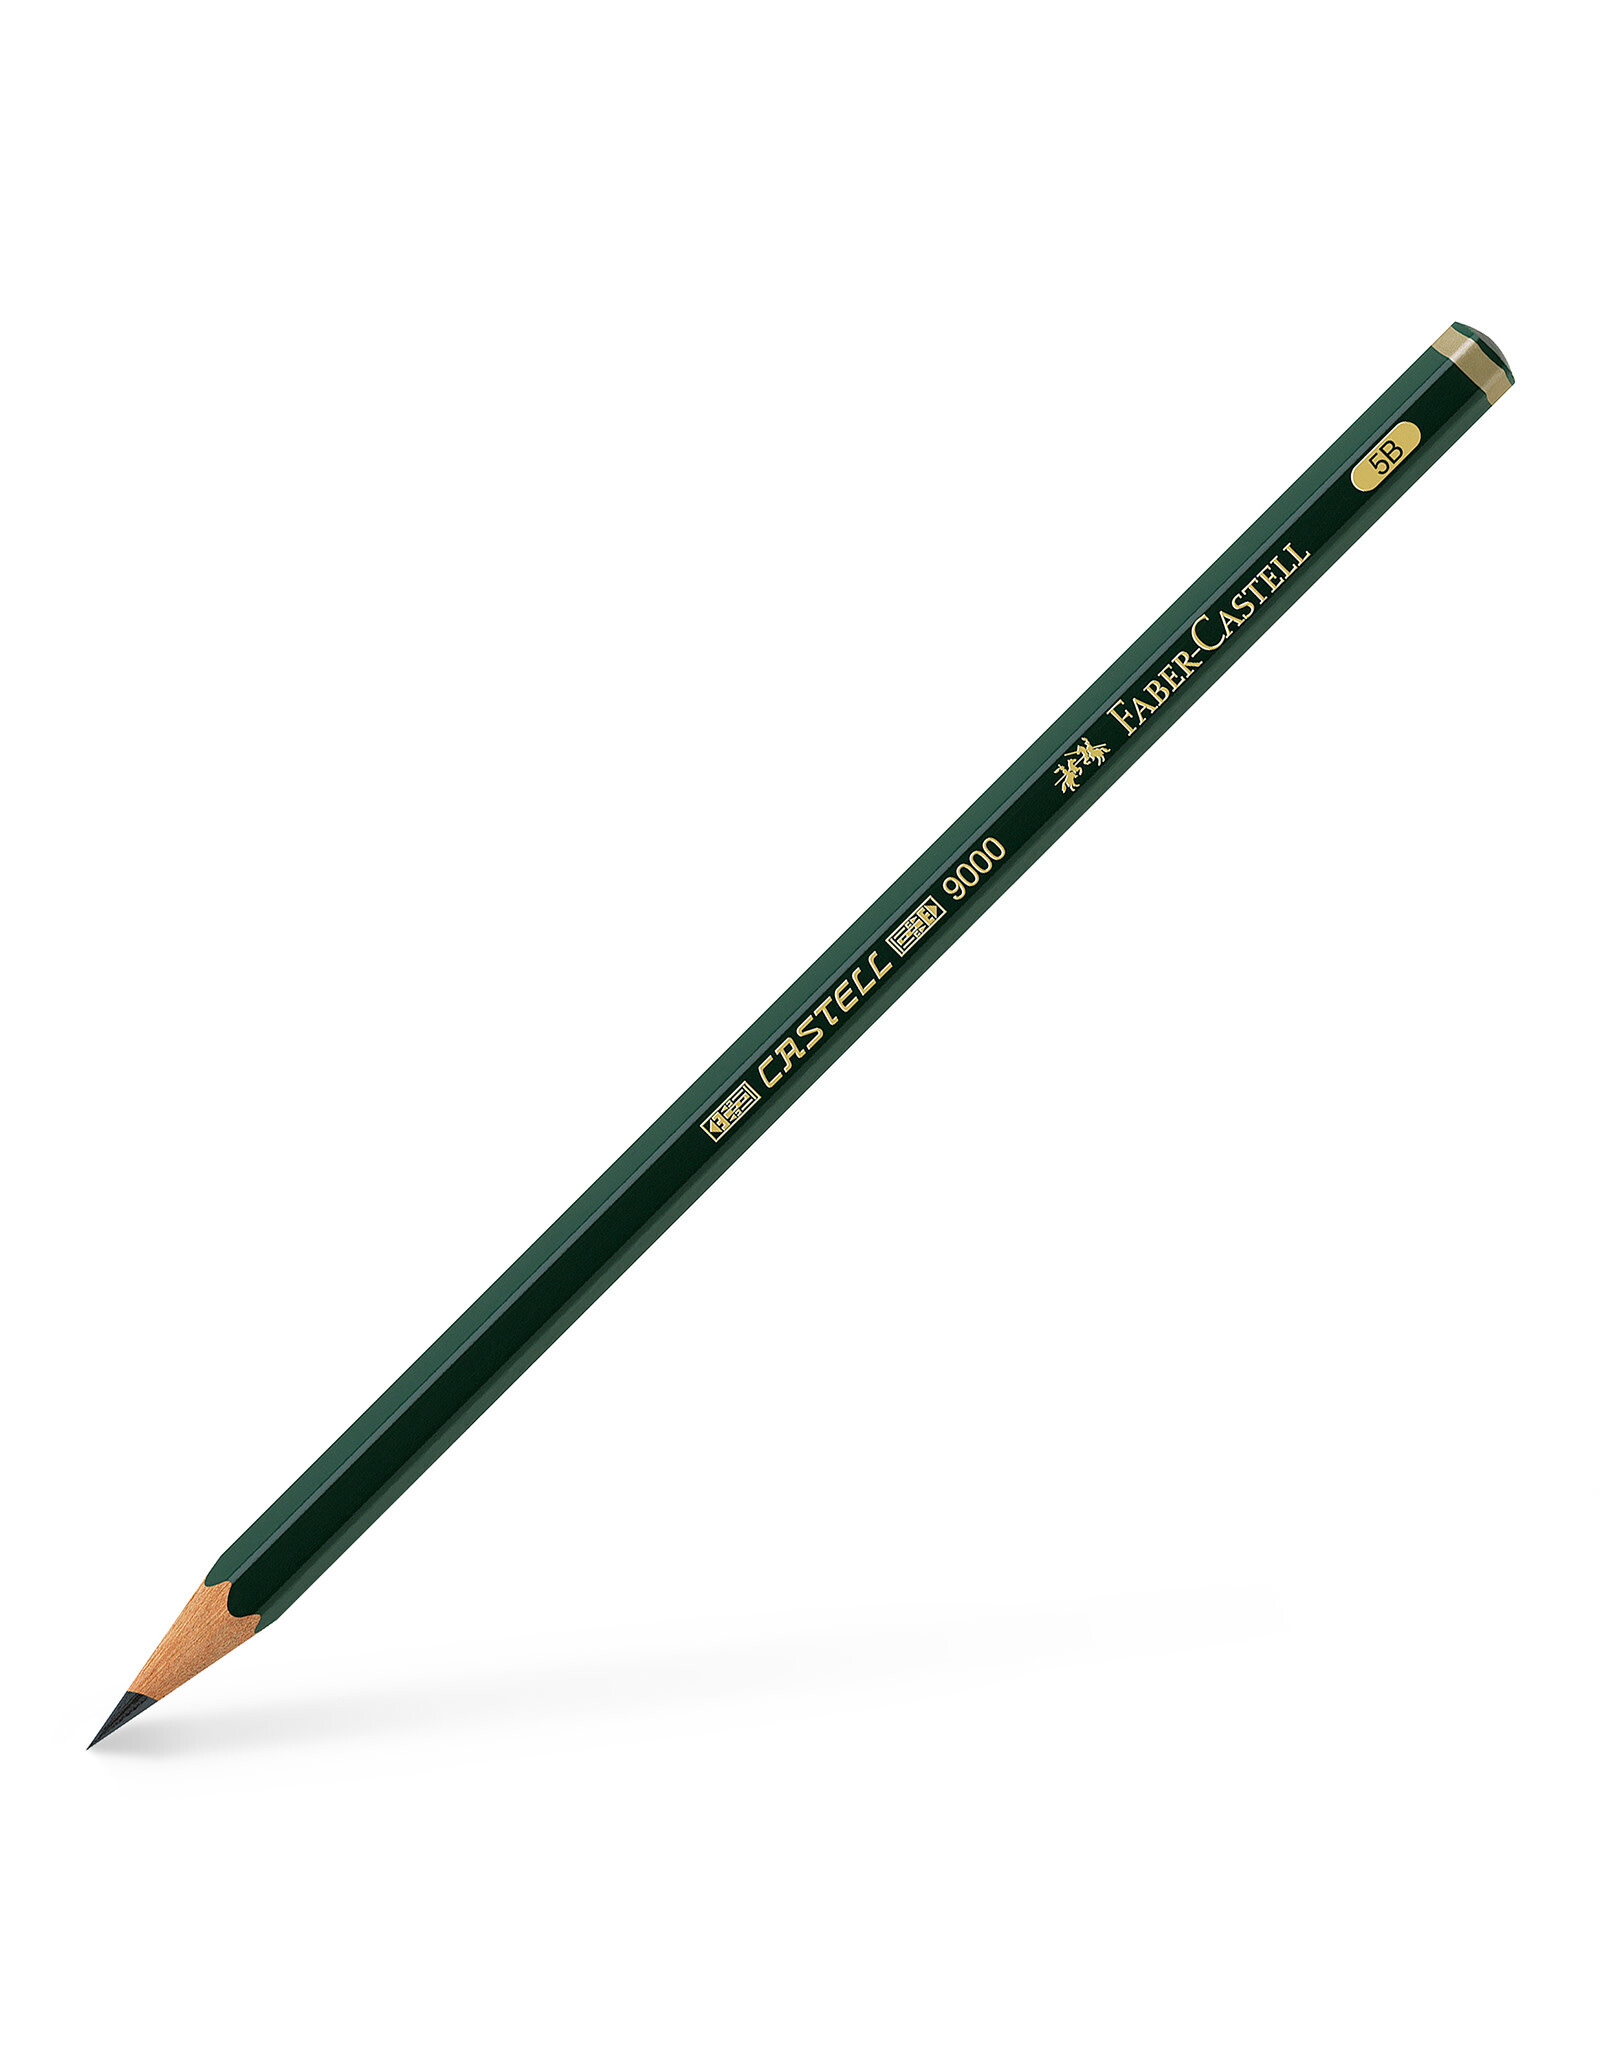 FABER-CASTELL Castell® 9000 Graphite Pencil, 5B